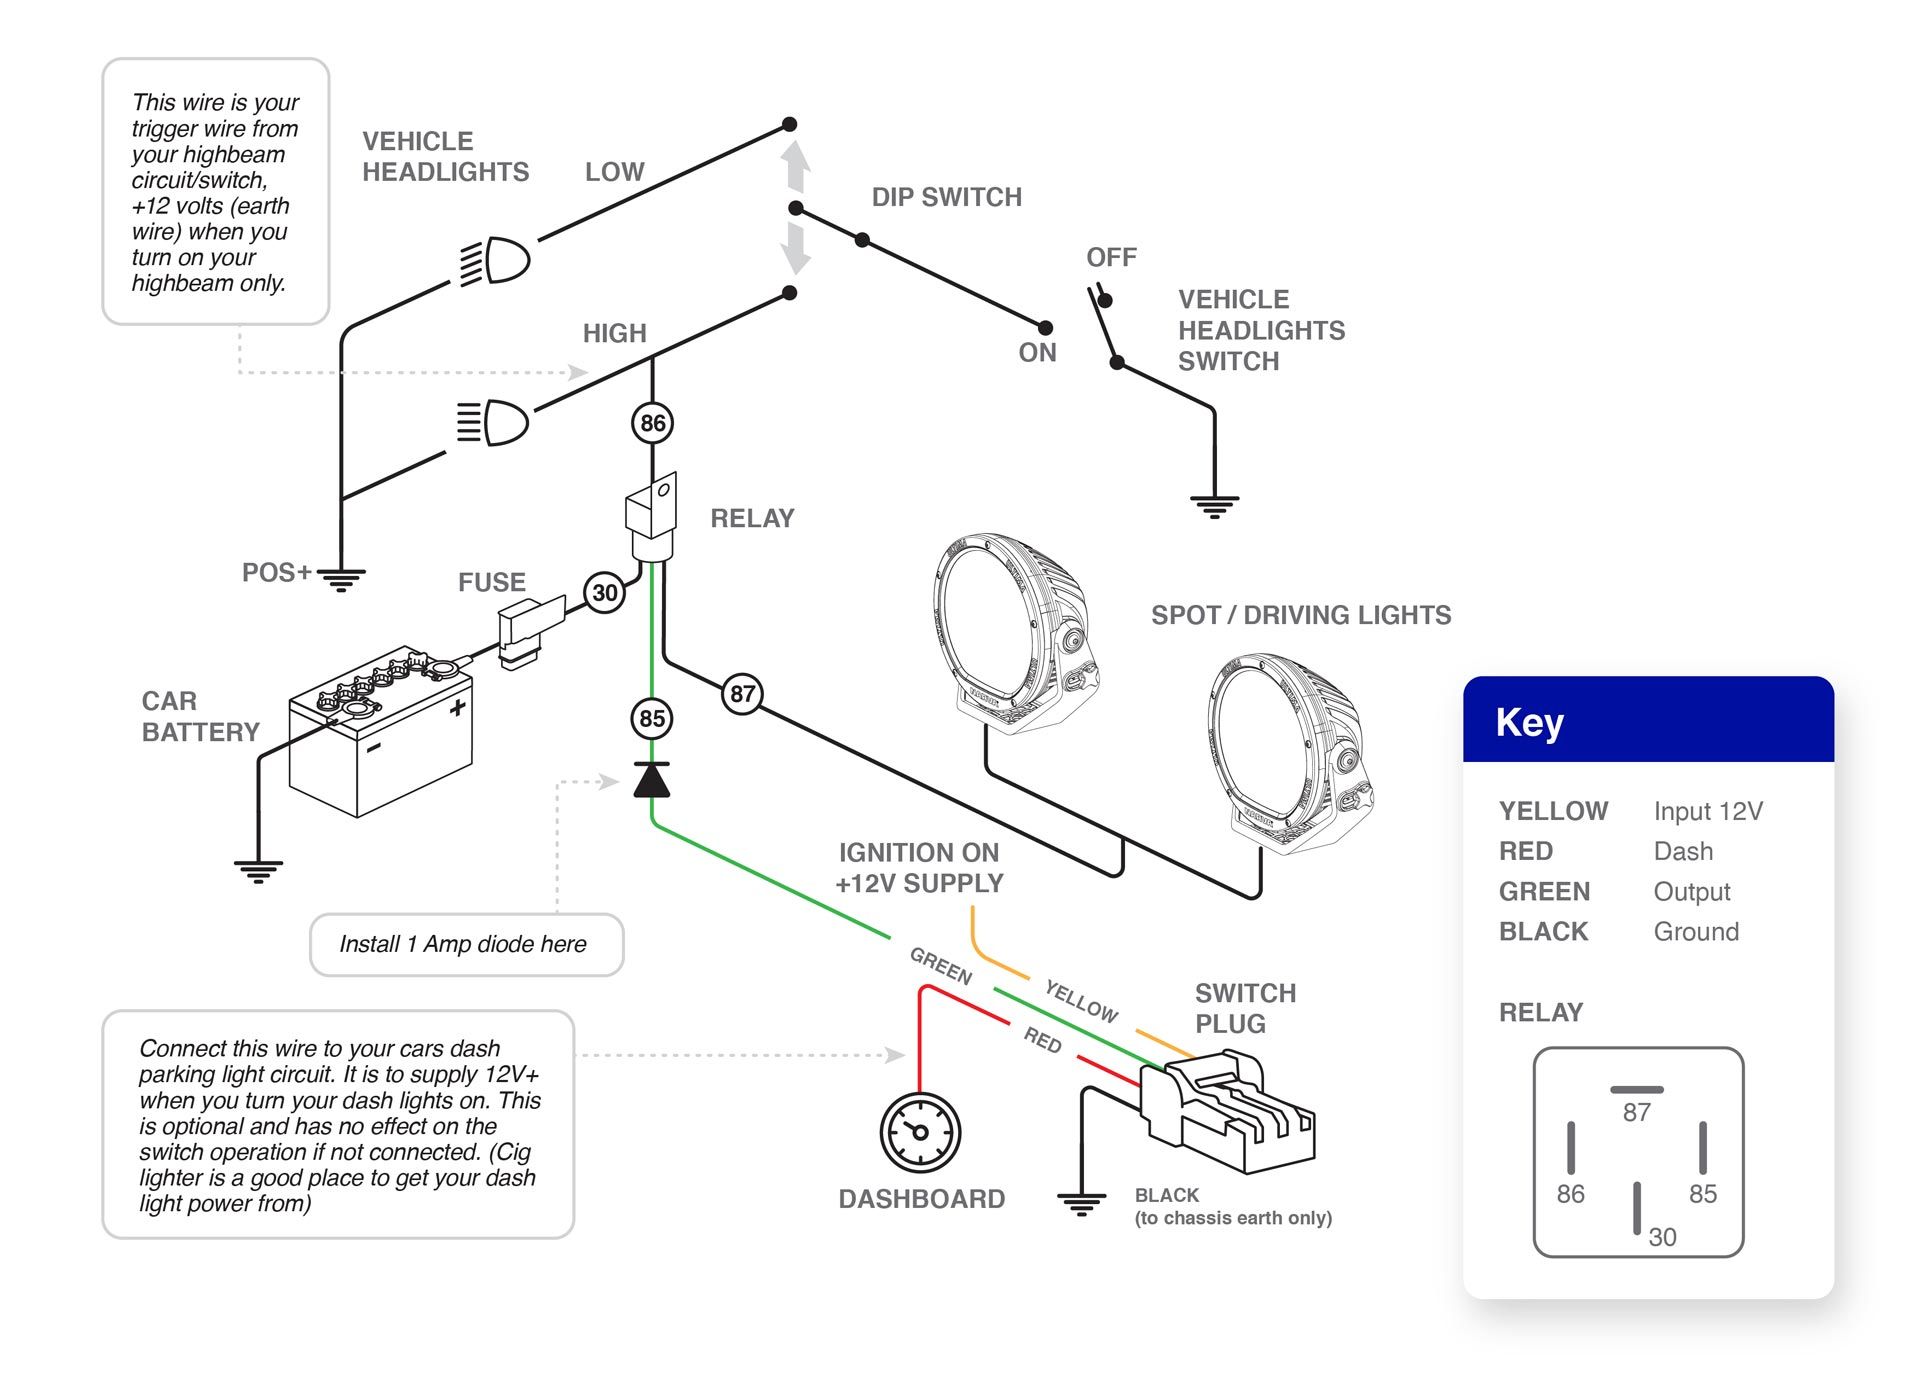 Switch wiring diagram for negative switched Nissan vehicles (refer to Nissan model)